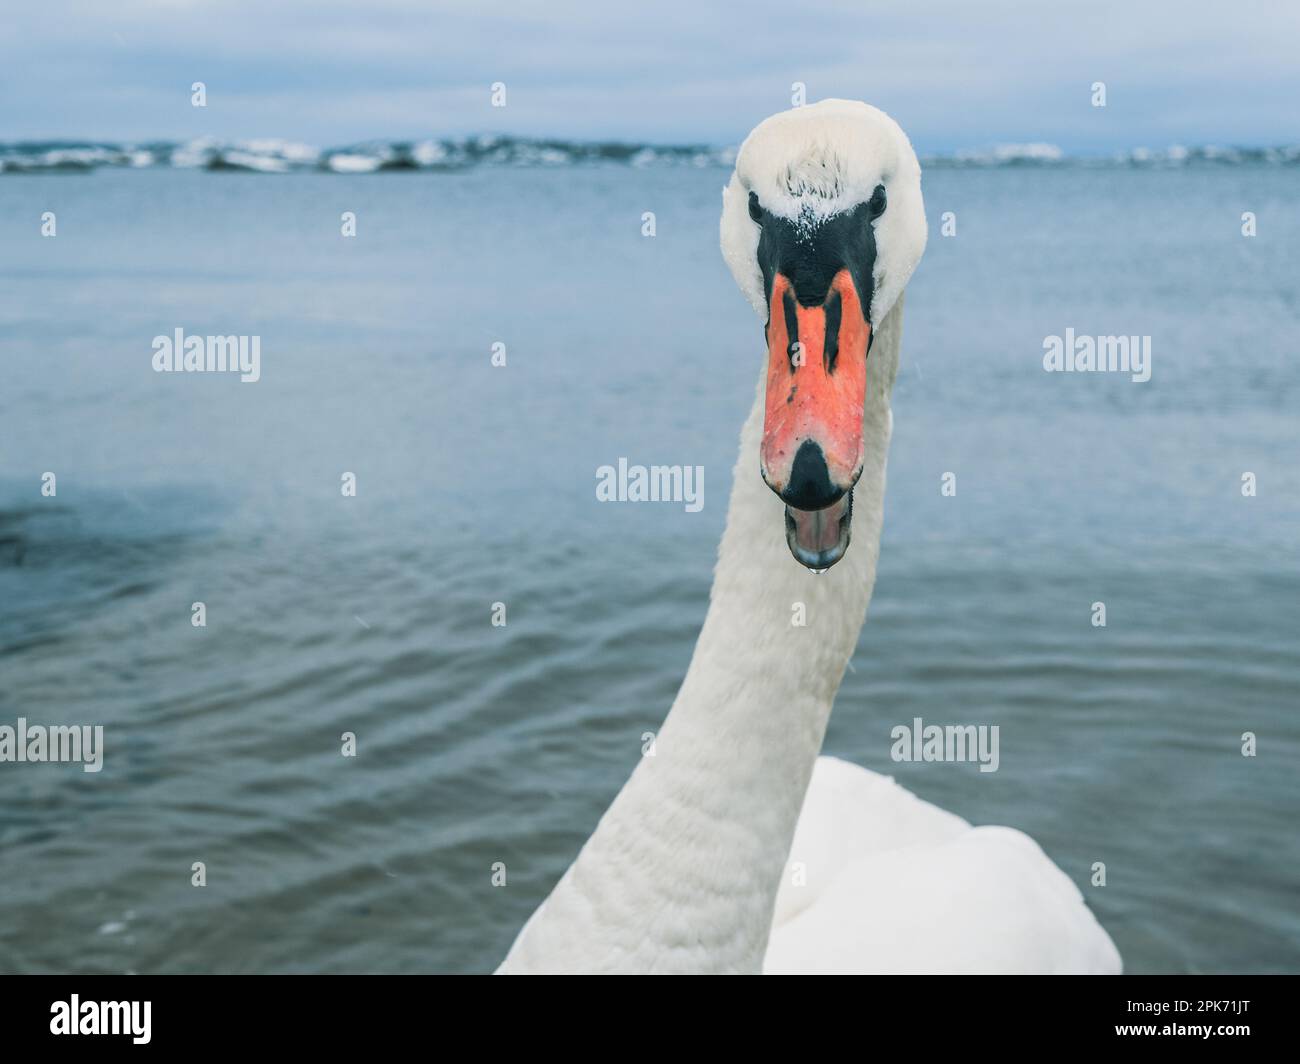 An angry swan stands in the icy waters of Sweden, a proud member of the duck, goose and swan wildlife family. Stock Photo